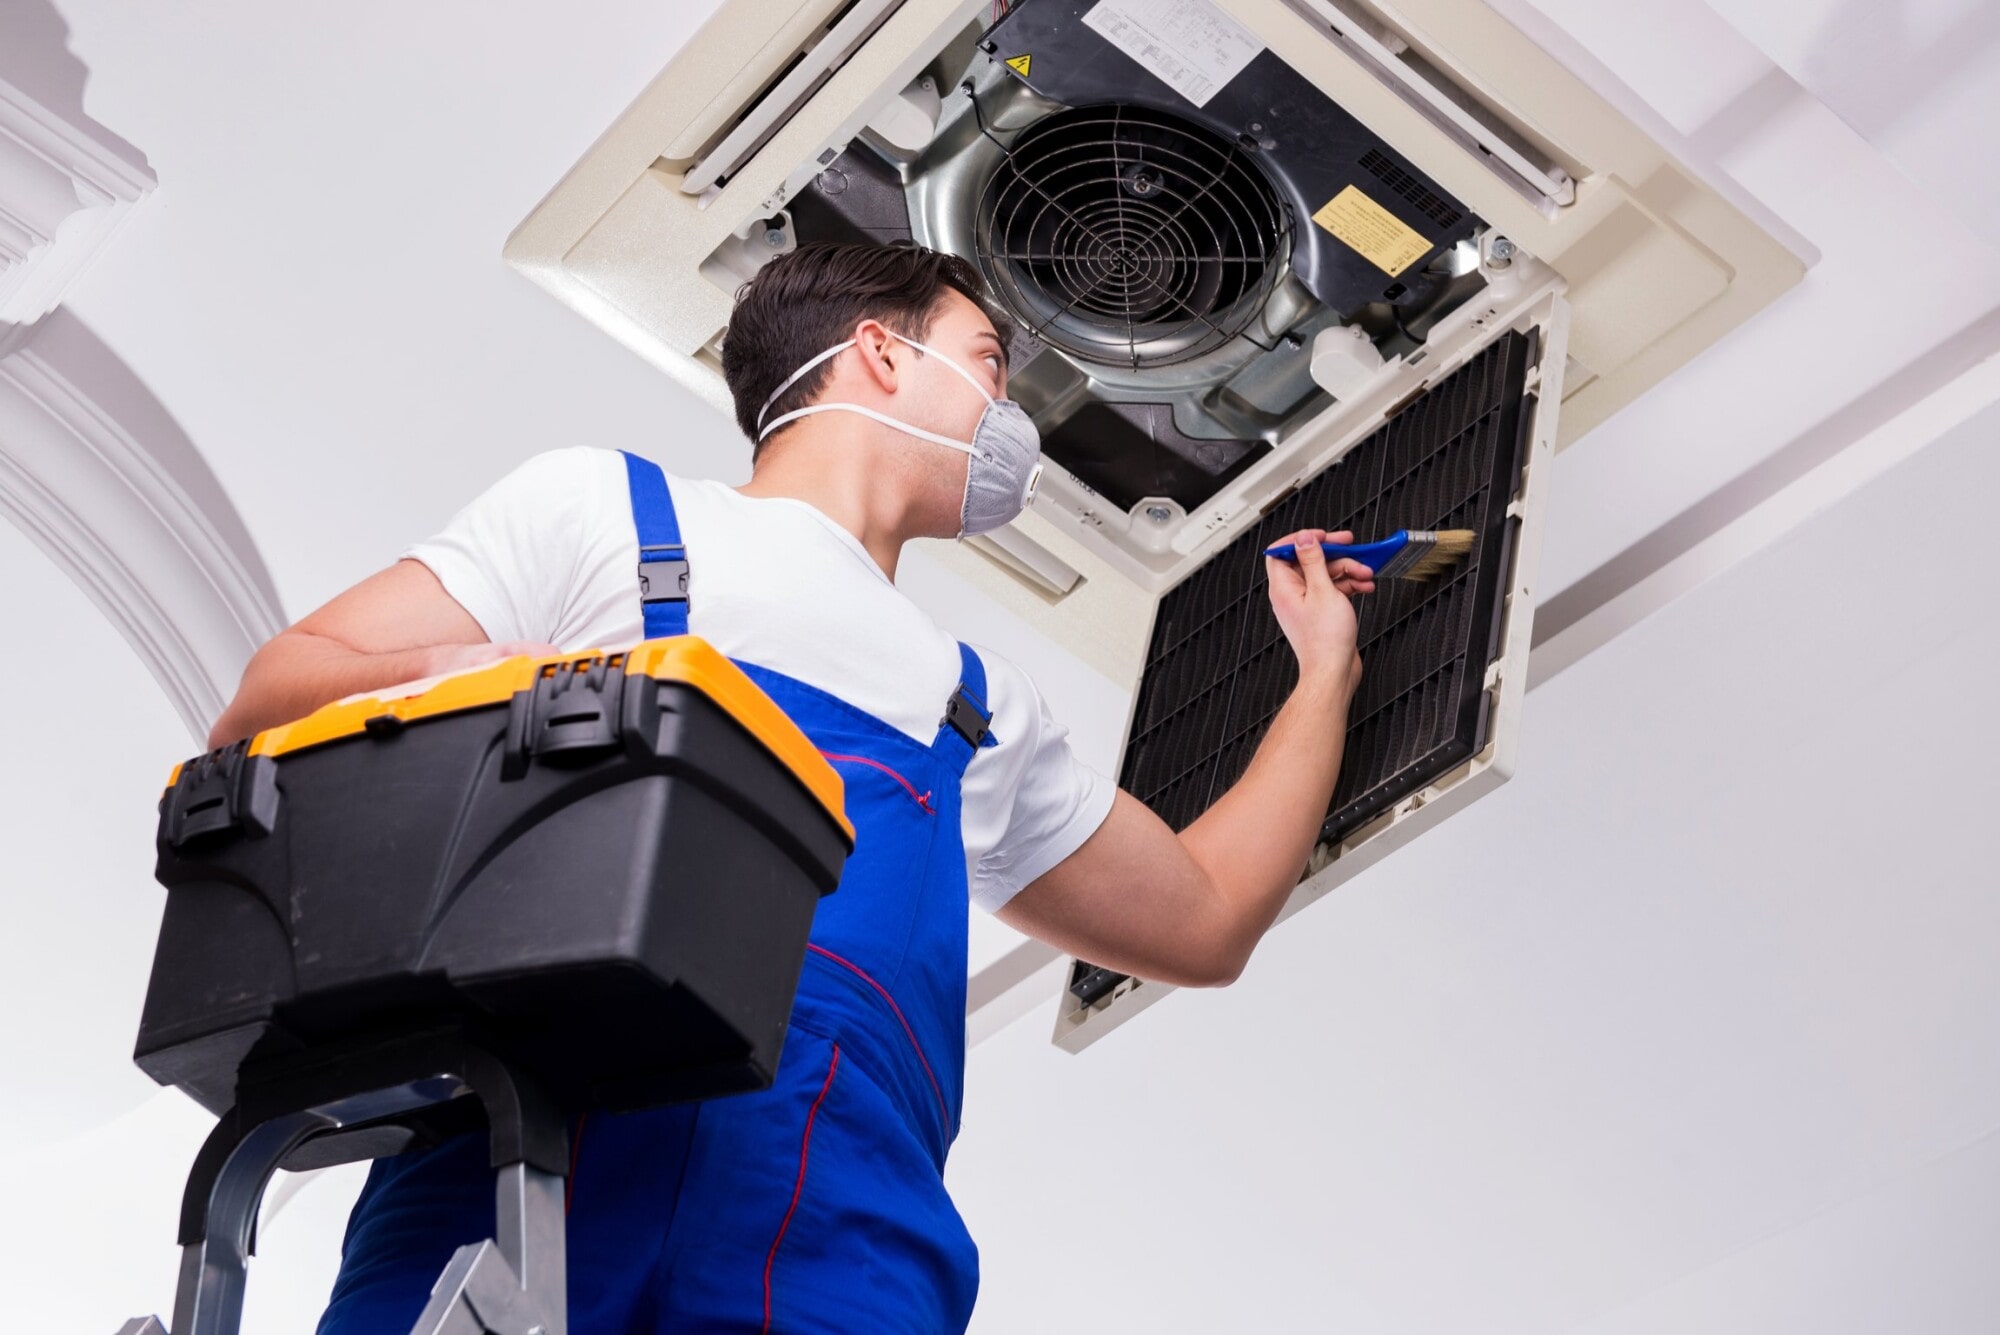 What to Look For in Great Building Maintenance Services